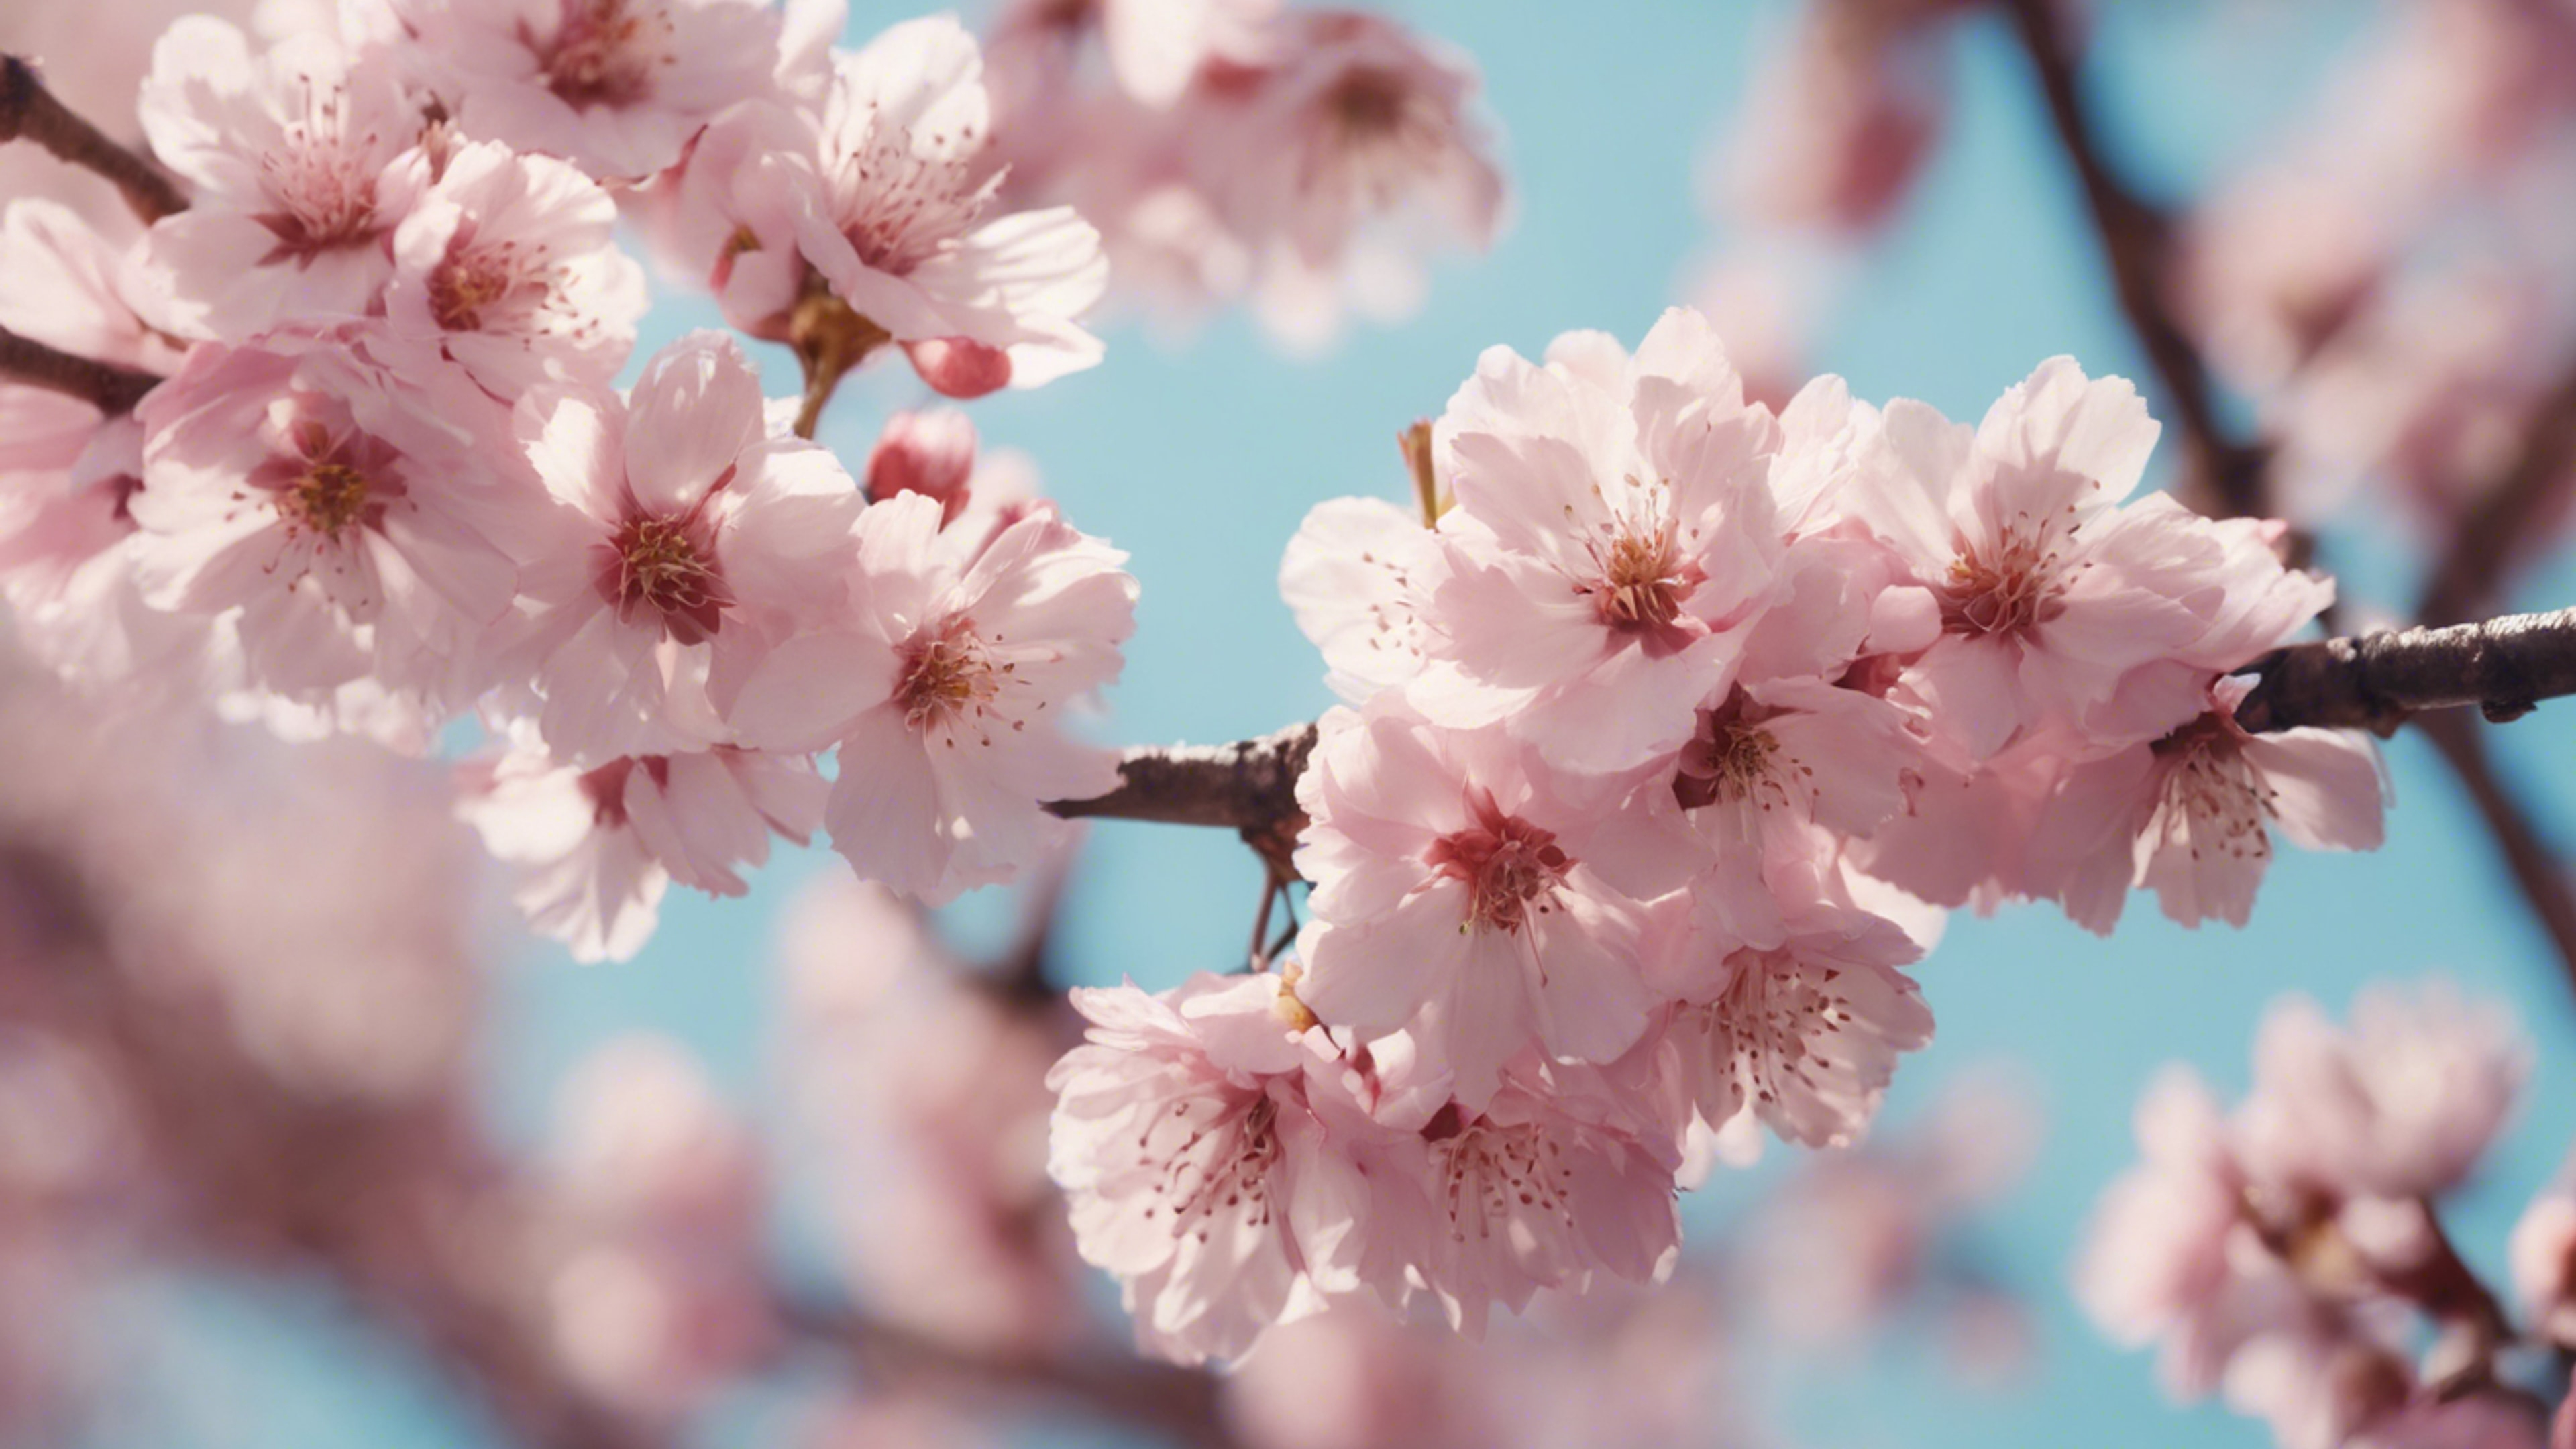 A vibrant scene of pastel pink cherry blossoms falling gently. Taustakuva[c8bce7433f184c22a8f5]